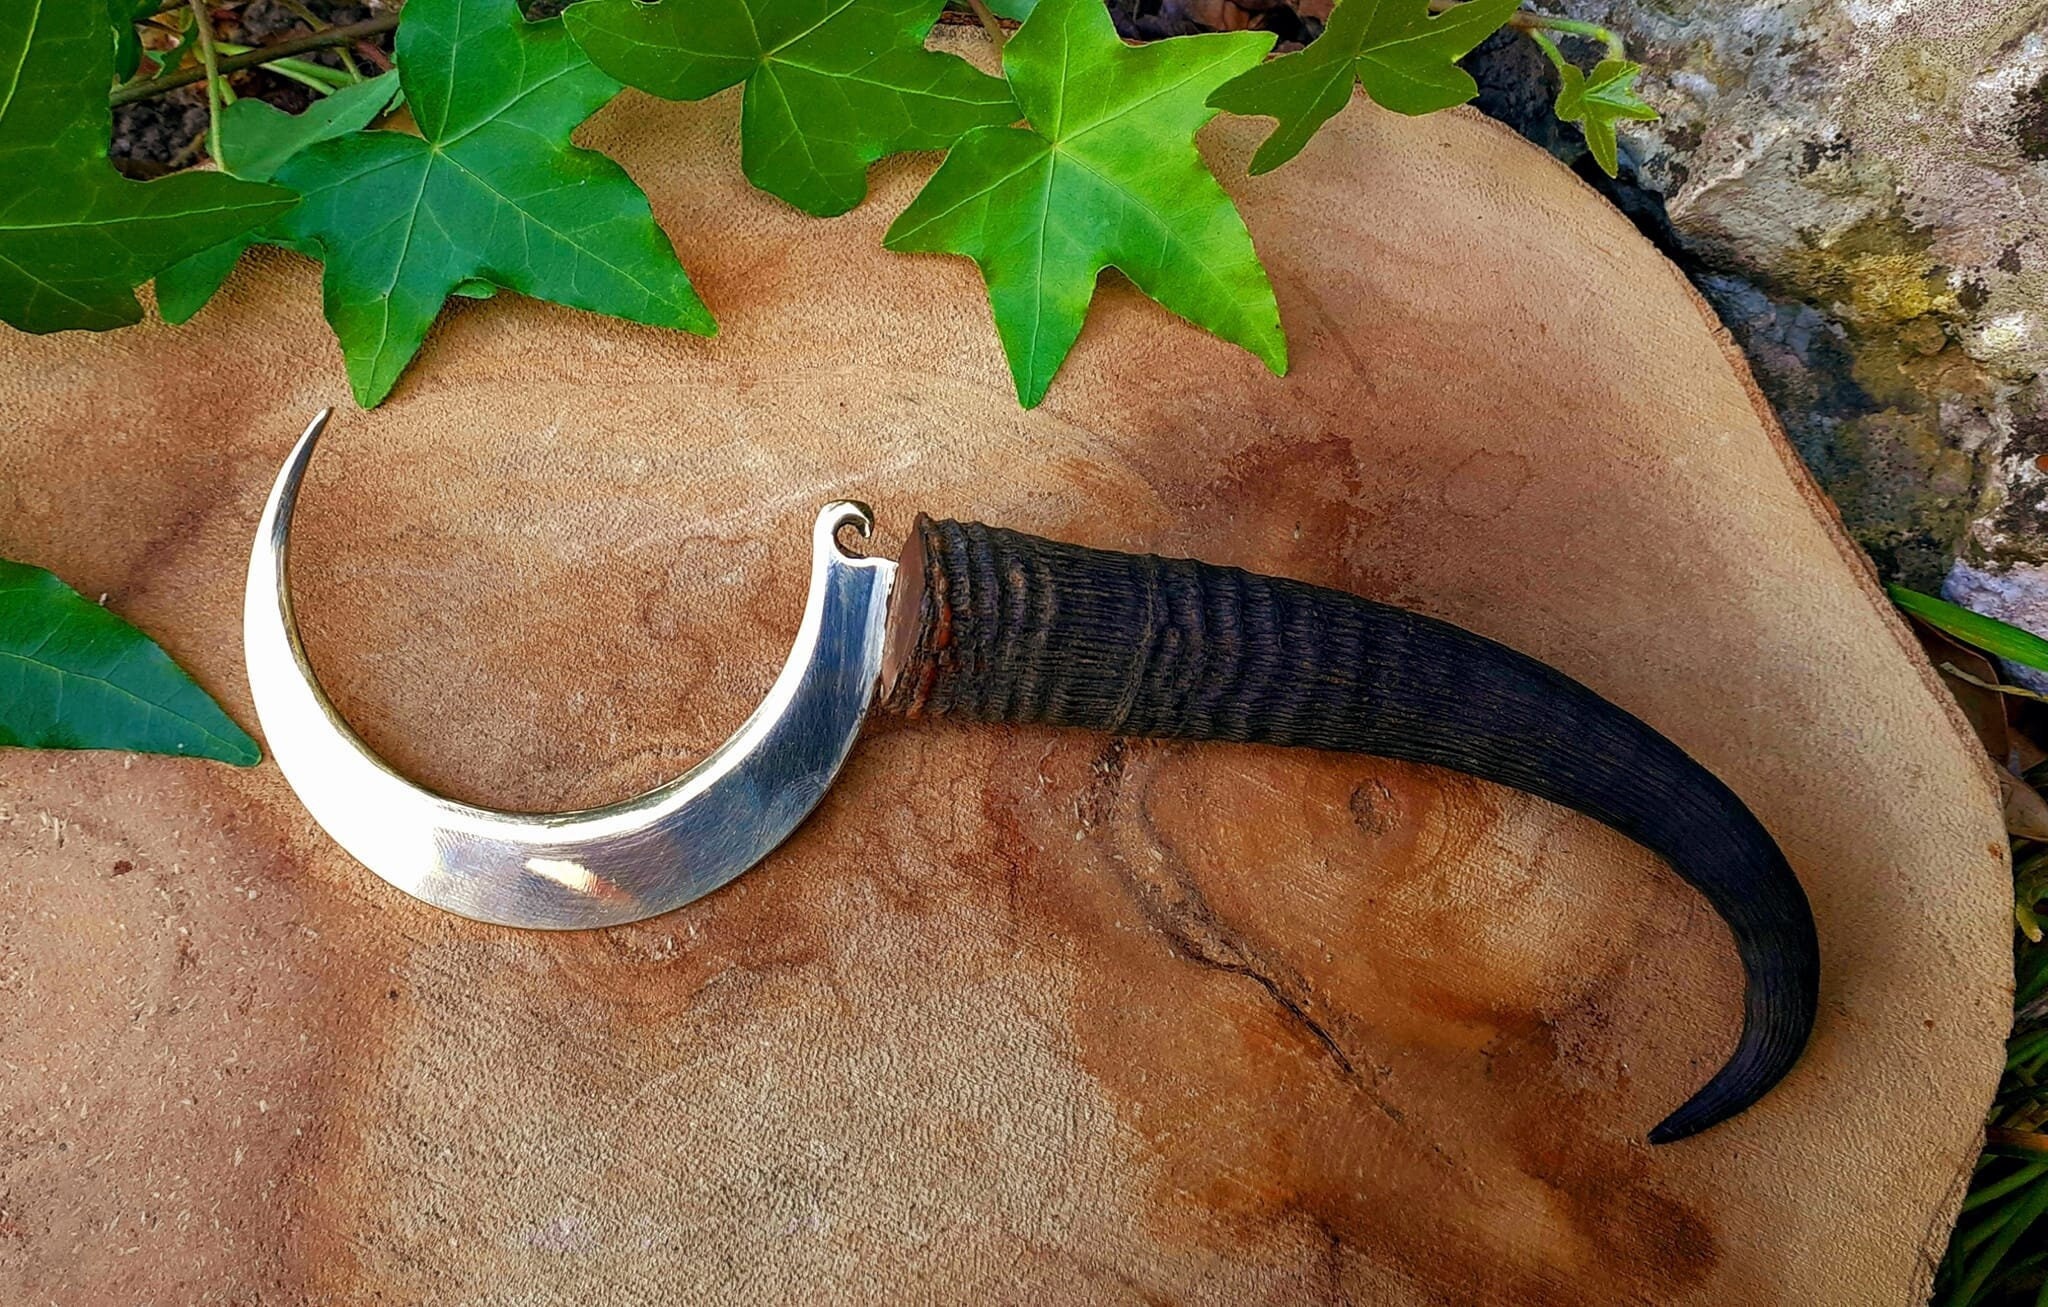 Handmade Forged Sickle Set 3pcs. the Tool for Herbalism. Forged Braid  Handmade for Collecting Herbs. Boline Ritual Sickle Hand Forged Boline 